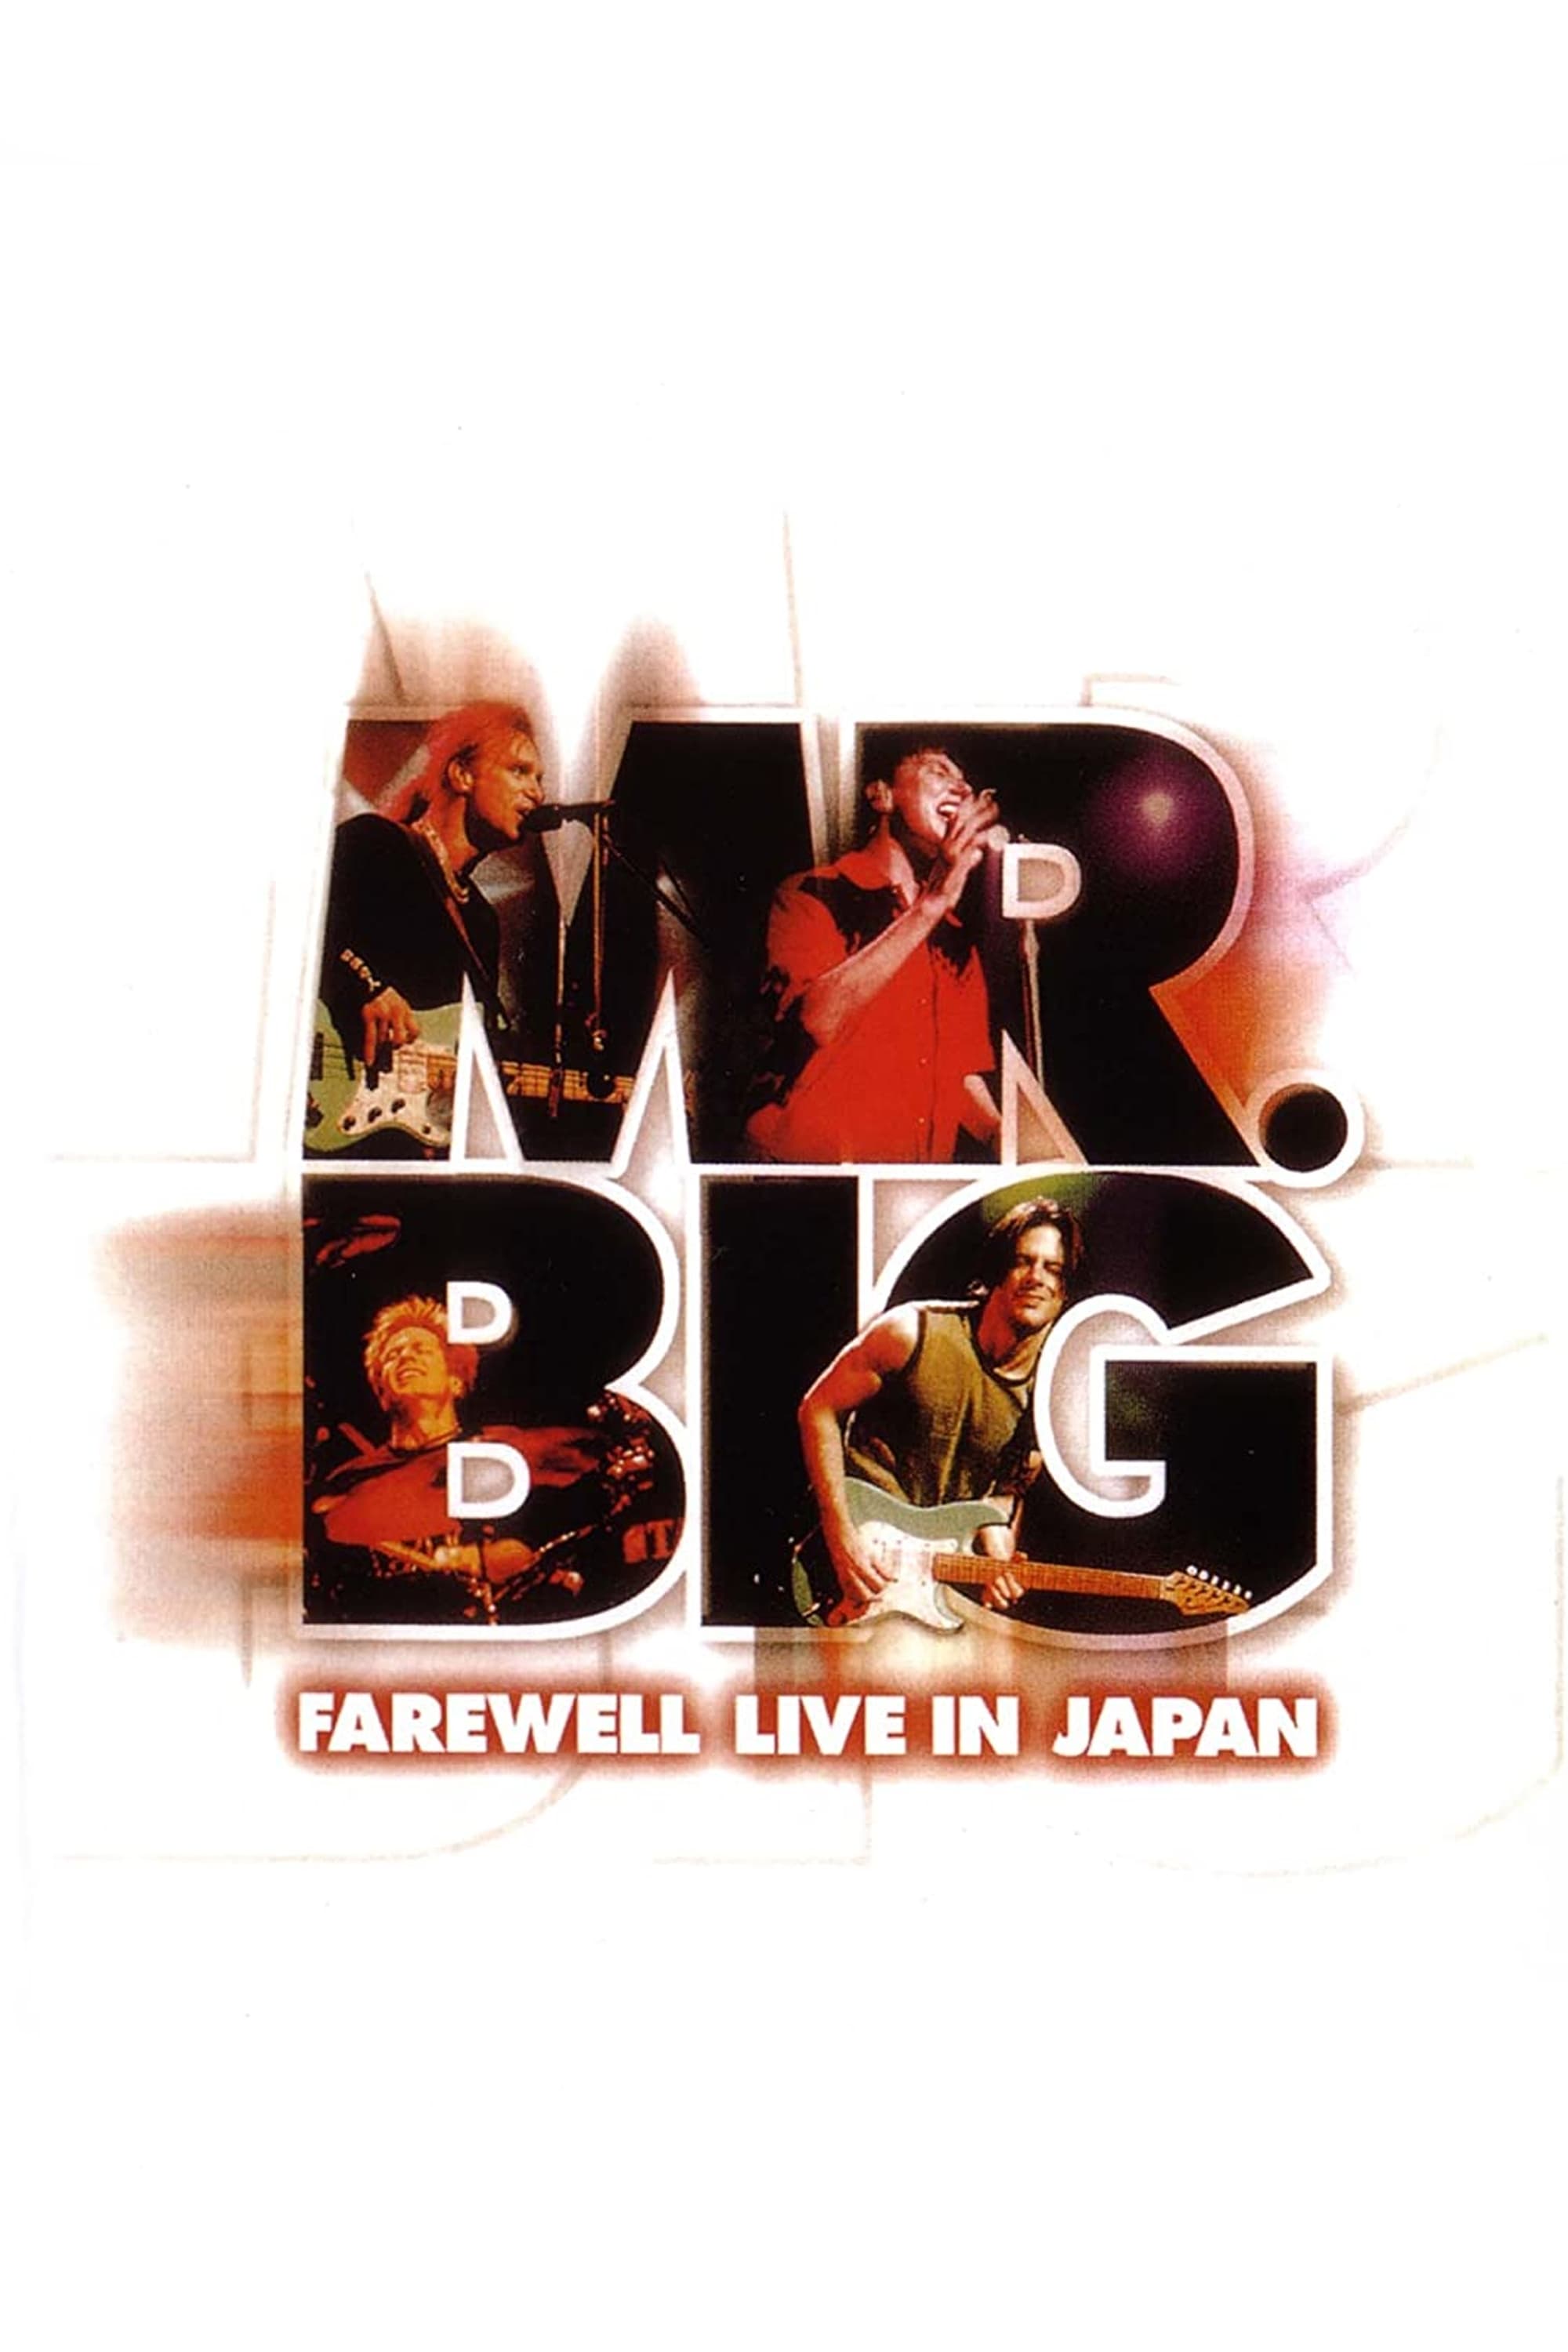 Mr. Big: Farewell Live in Japan